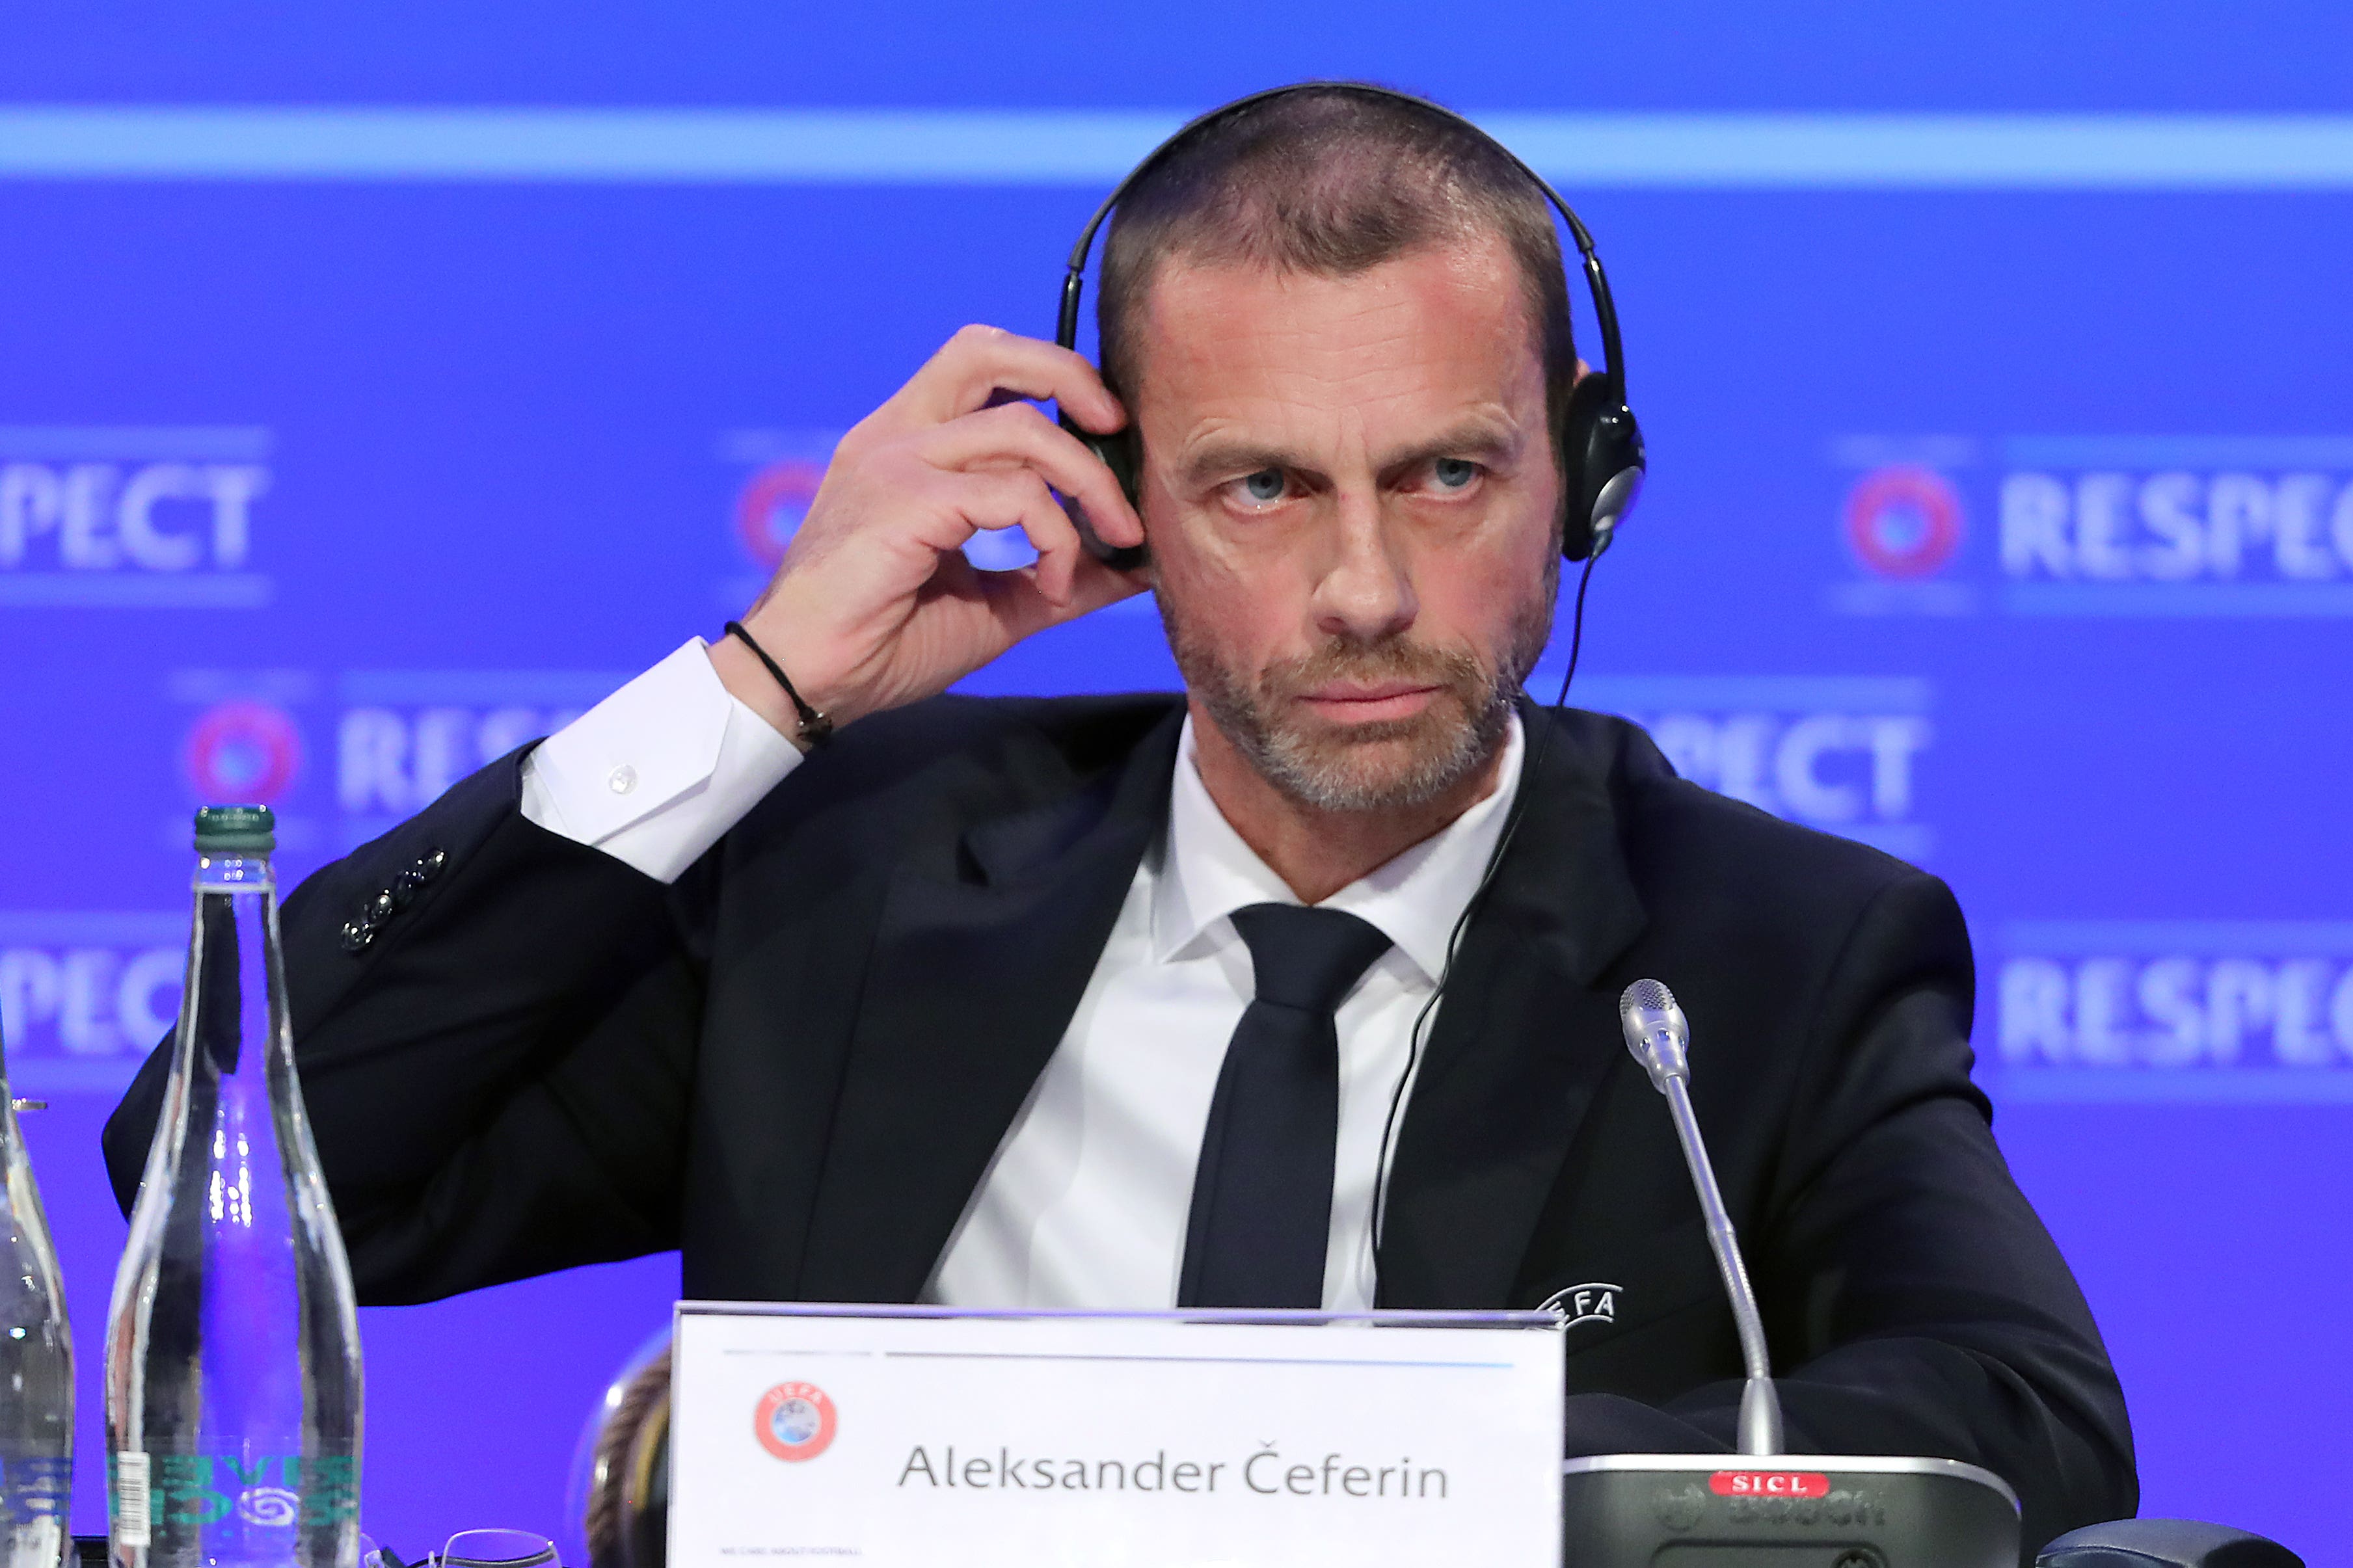 Uefa president Aleksander Ceferin accepted the fan experience at the Champions League final in Istanbul was not perfect